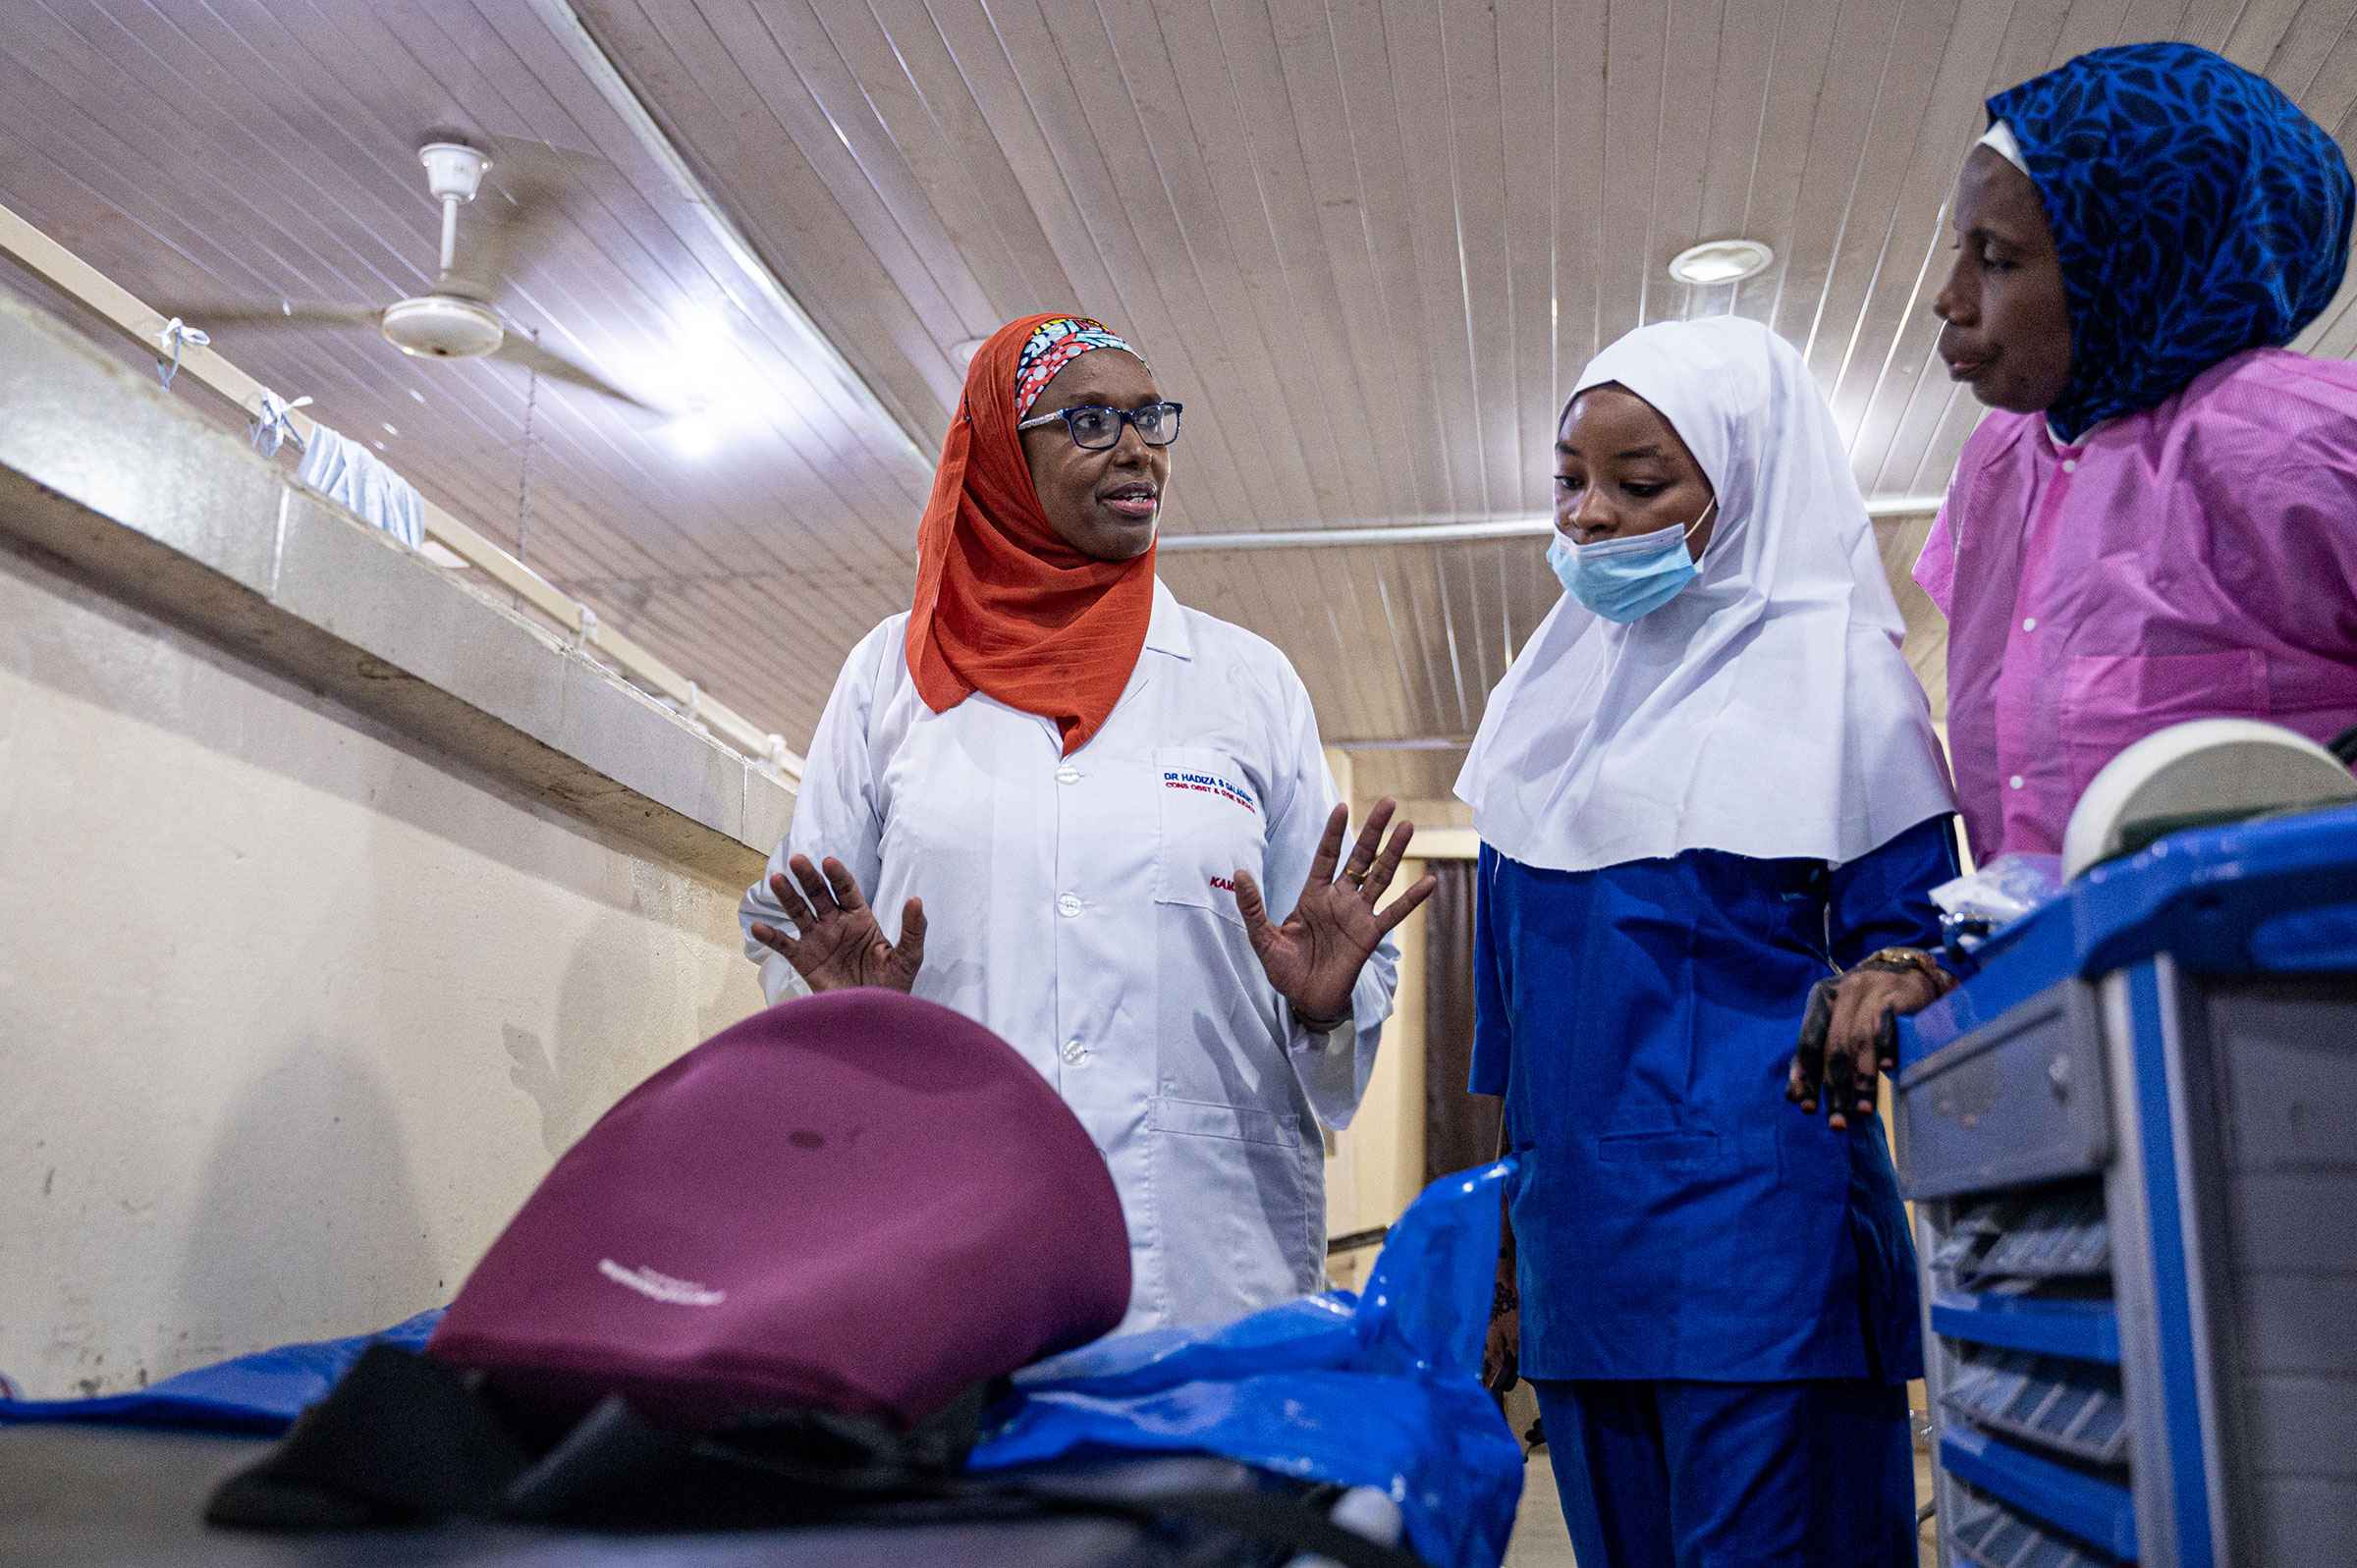 Professor Hadiza Shehu Galadanci, Director of The African Center of Excellence for Population Health and Policy (ACEPHAP), demonstrates the use of the E-MOTIVE care bundle to Fatimah Sarikin Fulani (blue PPE) and Nafisa Abbas (pink) in the E-MOVITE research site at the Aminu Kano Teaching Hospital, Bayero University, in Kano, Nigeria, on August 10, 2023. The E-MOTIVE care bundle is used to detect and prevent postpartum hemorrhaging.